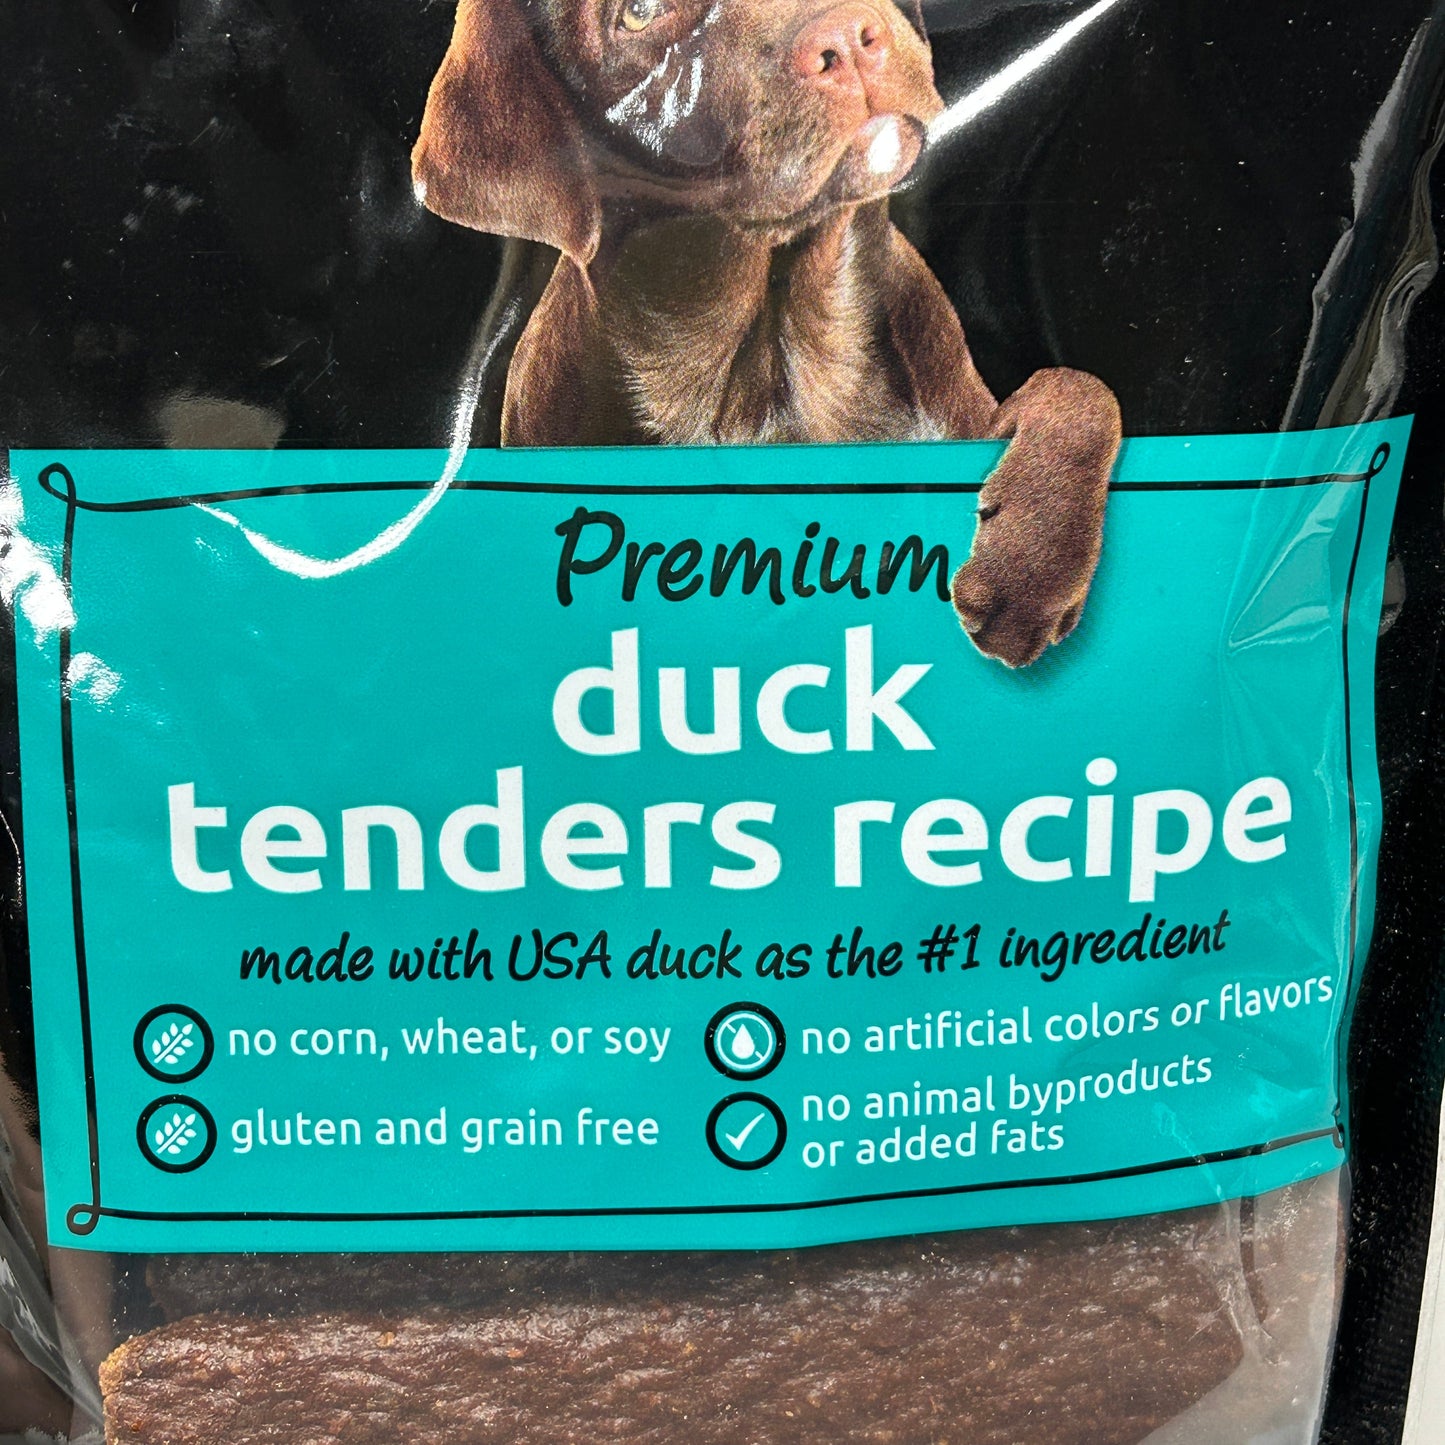 ZA@ PETSHOPPE Premium Duck Tenders Dog Treats Made in USA All Natural 12 oz 09/24 (New) G